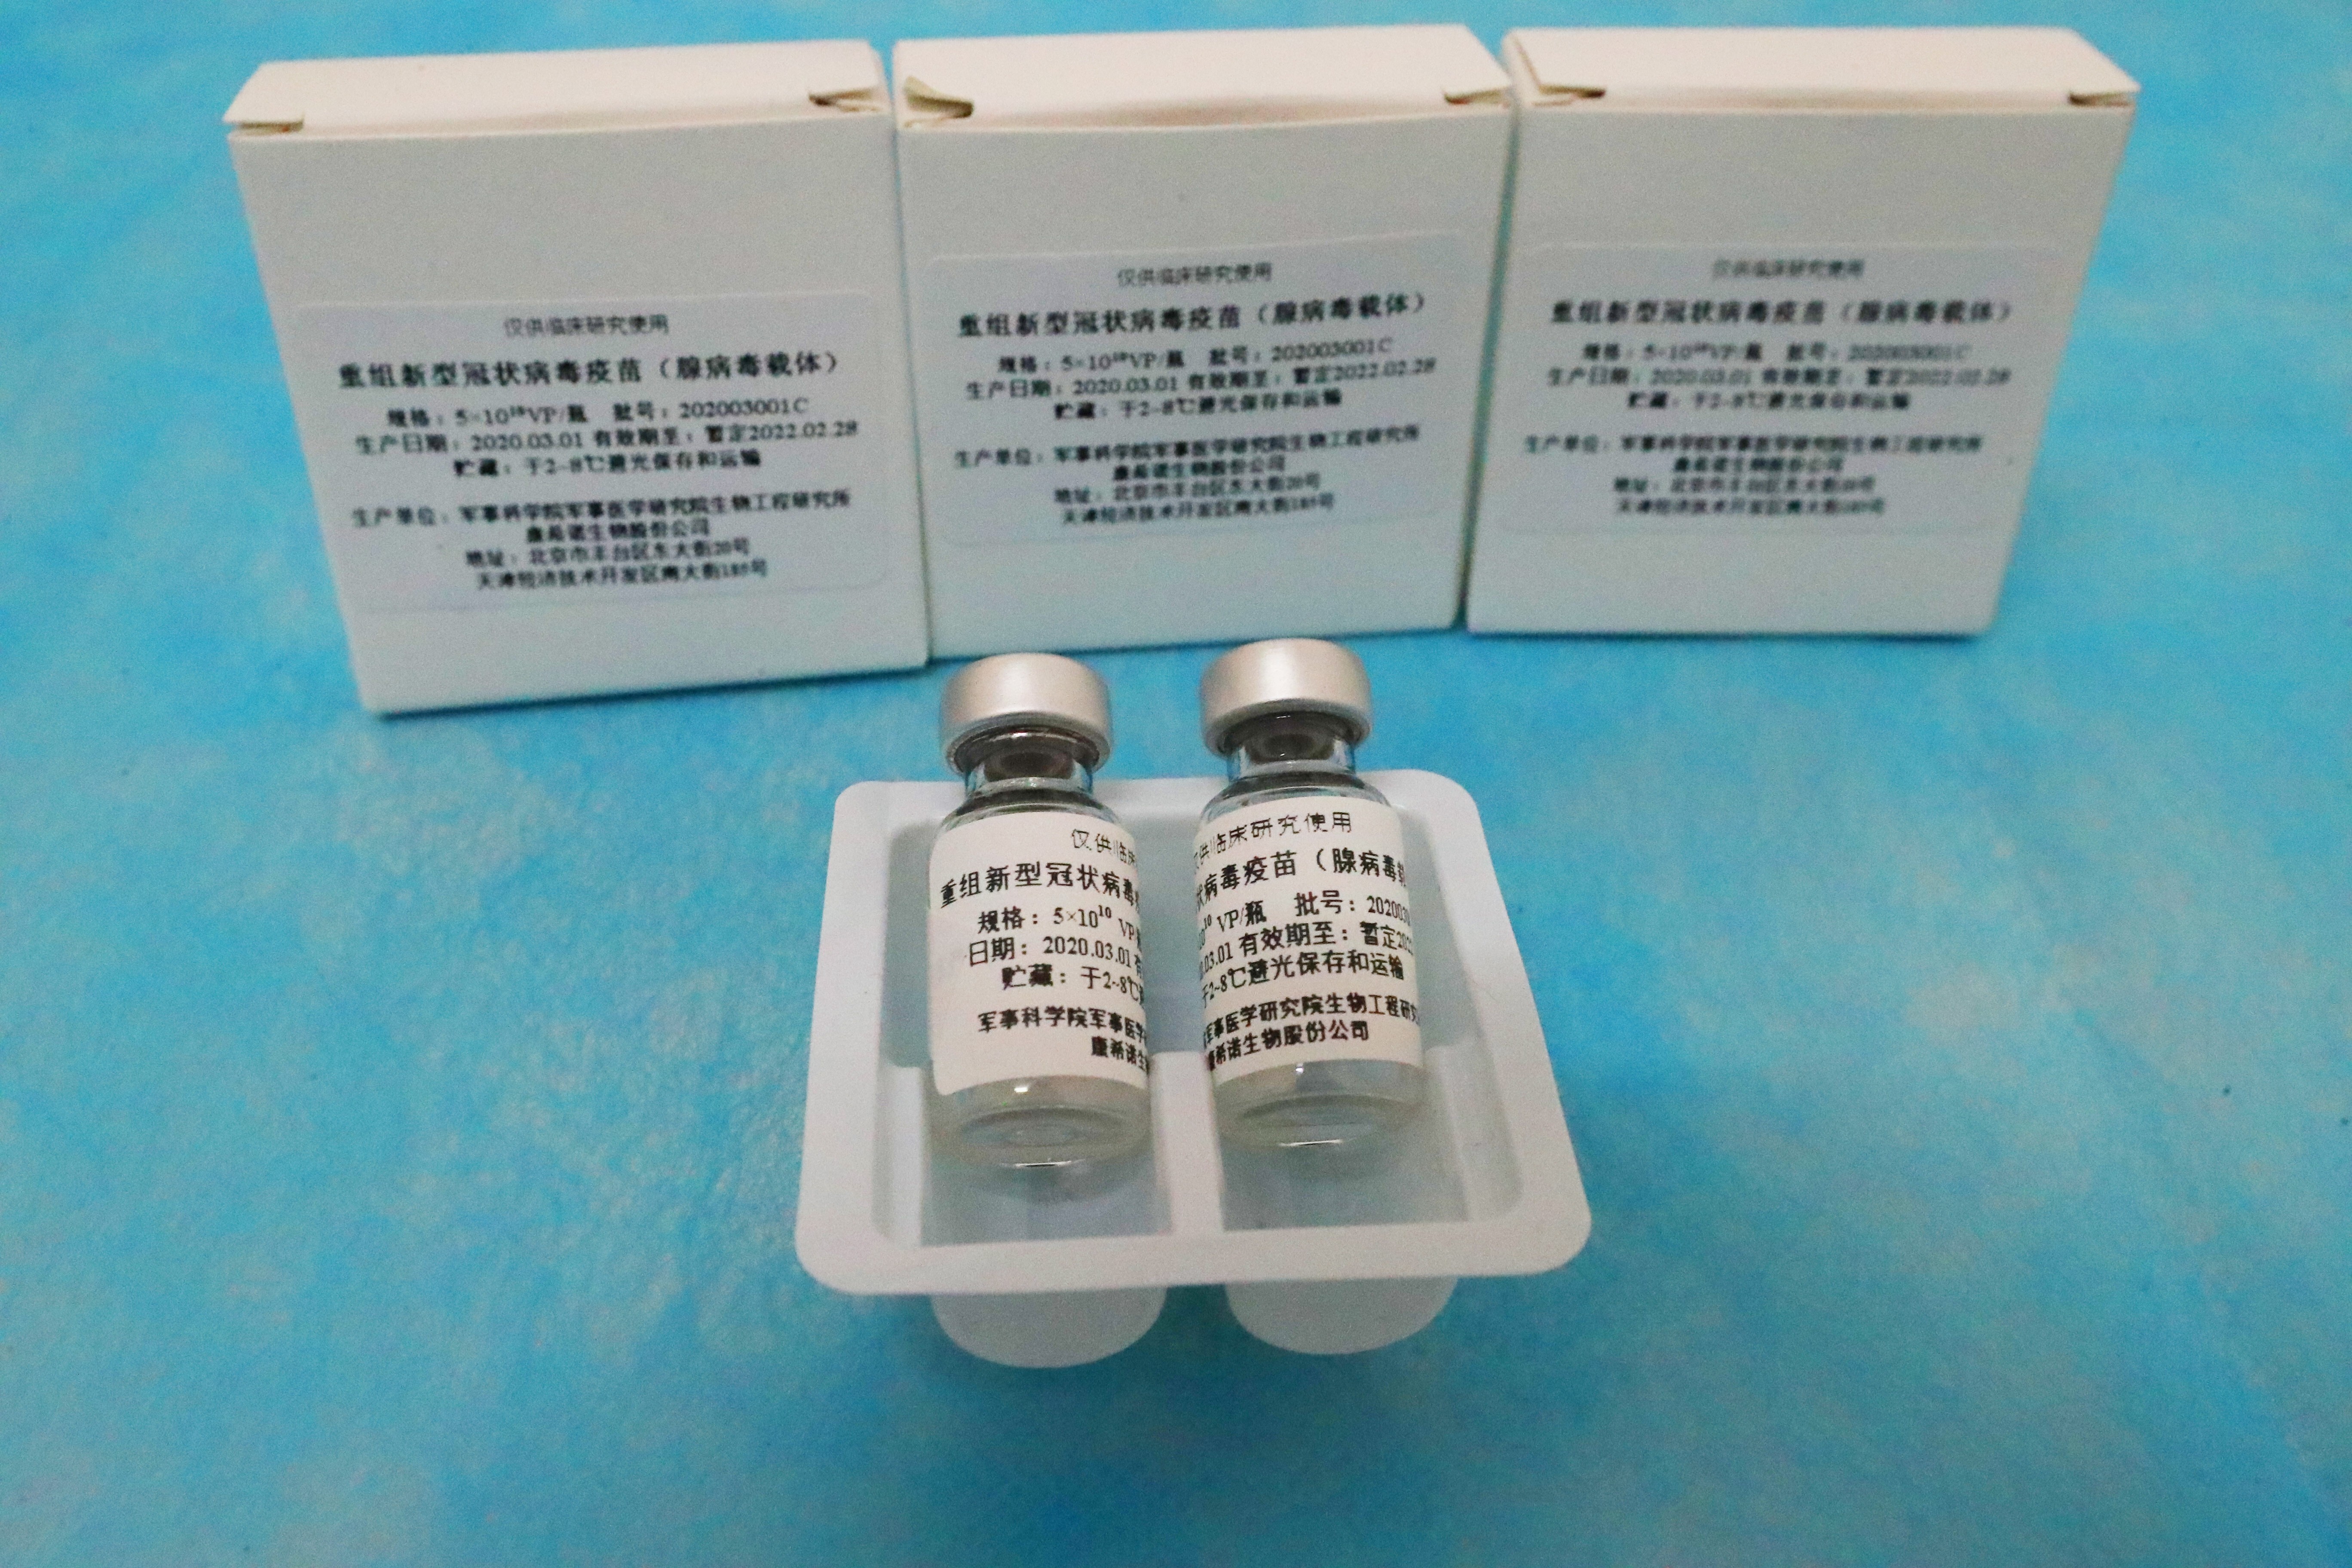 The CanSino vaccine was tested on healthy volunteers in Wuhan in March last year. Photo: Reuters